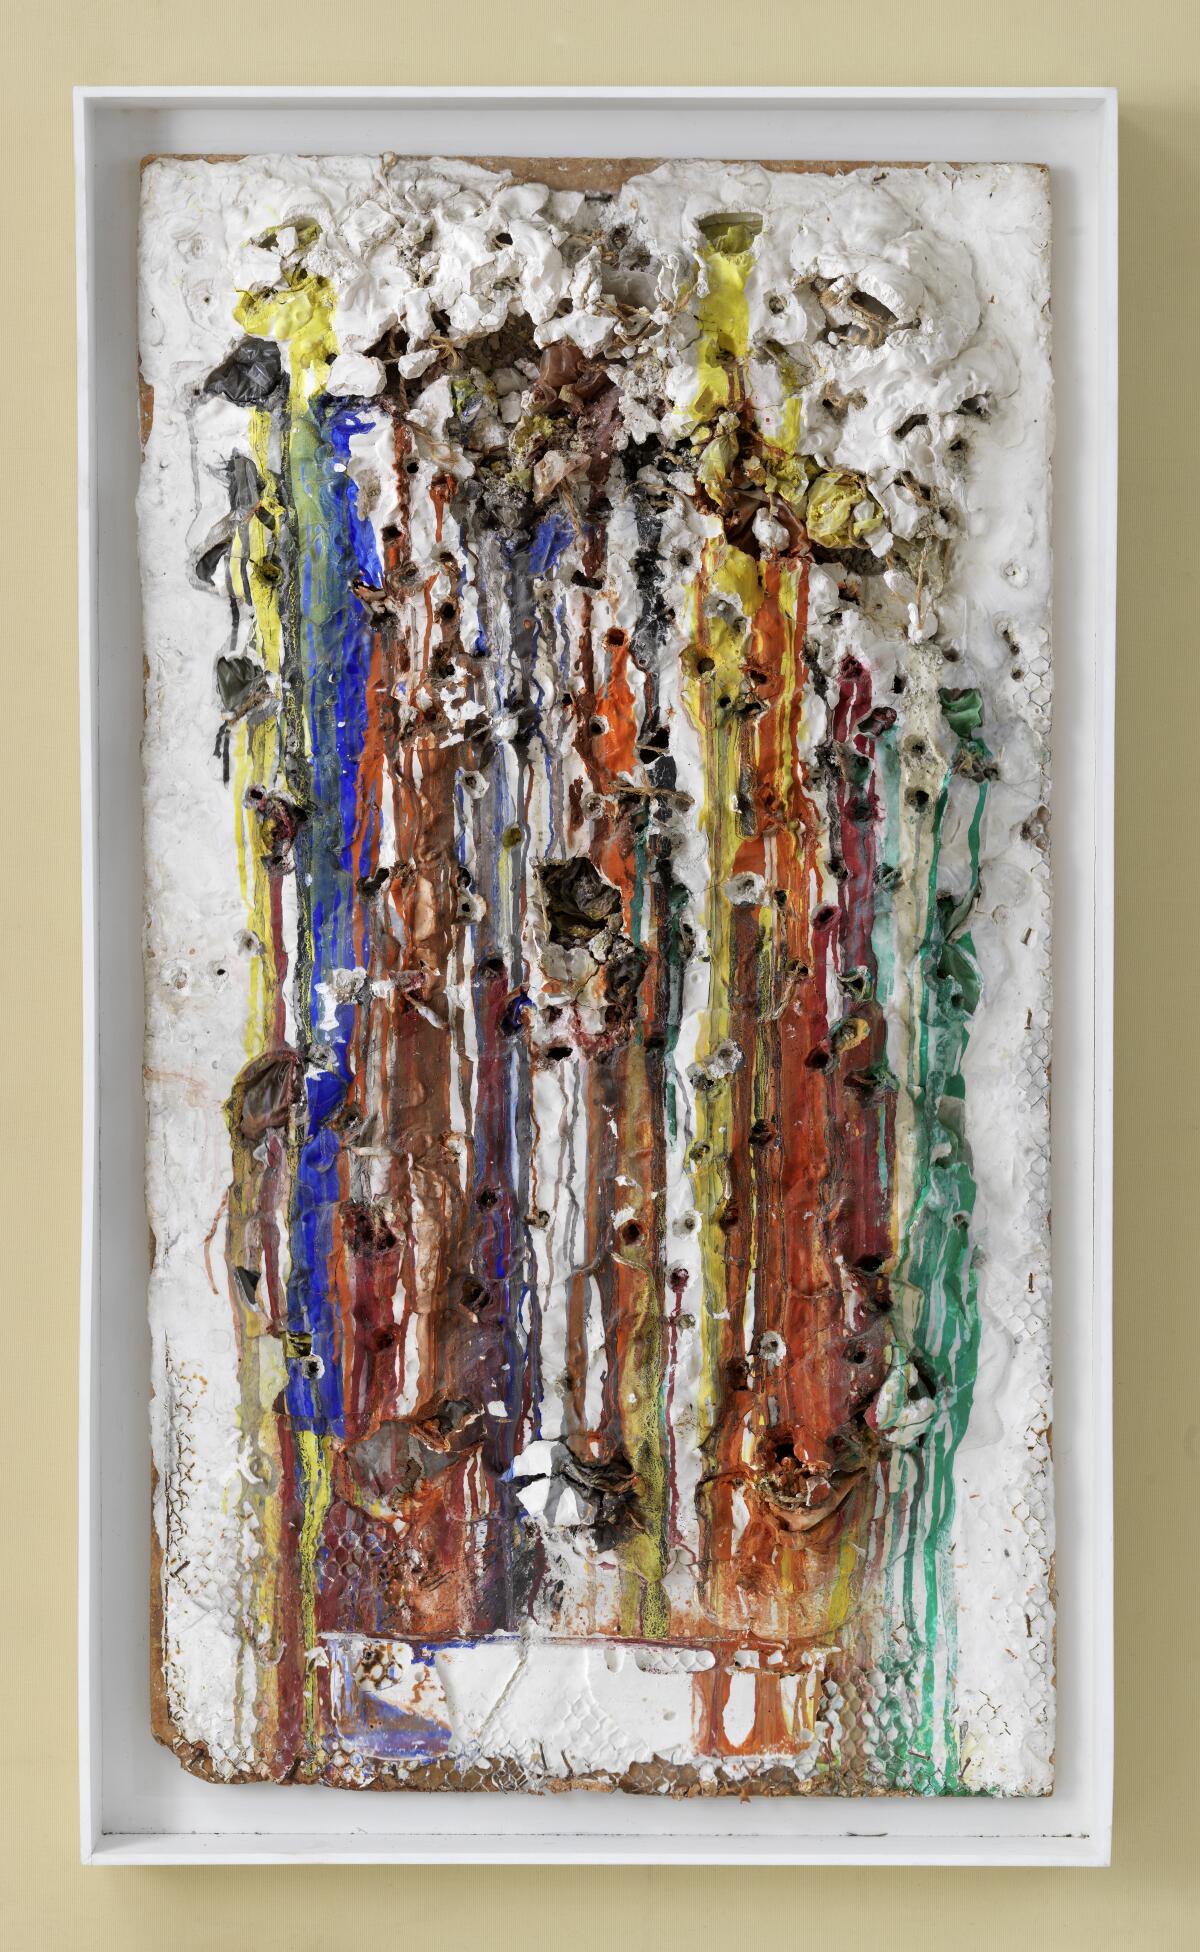 A mixed-media work featuring dripping paint over a plaster cast.